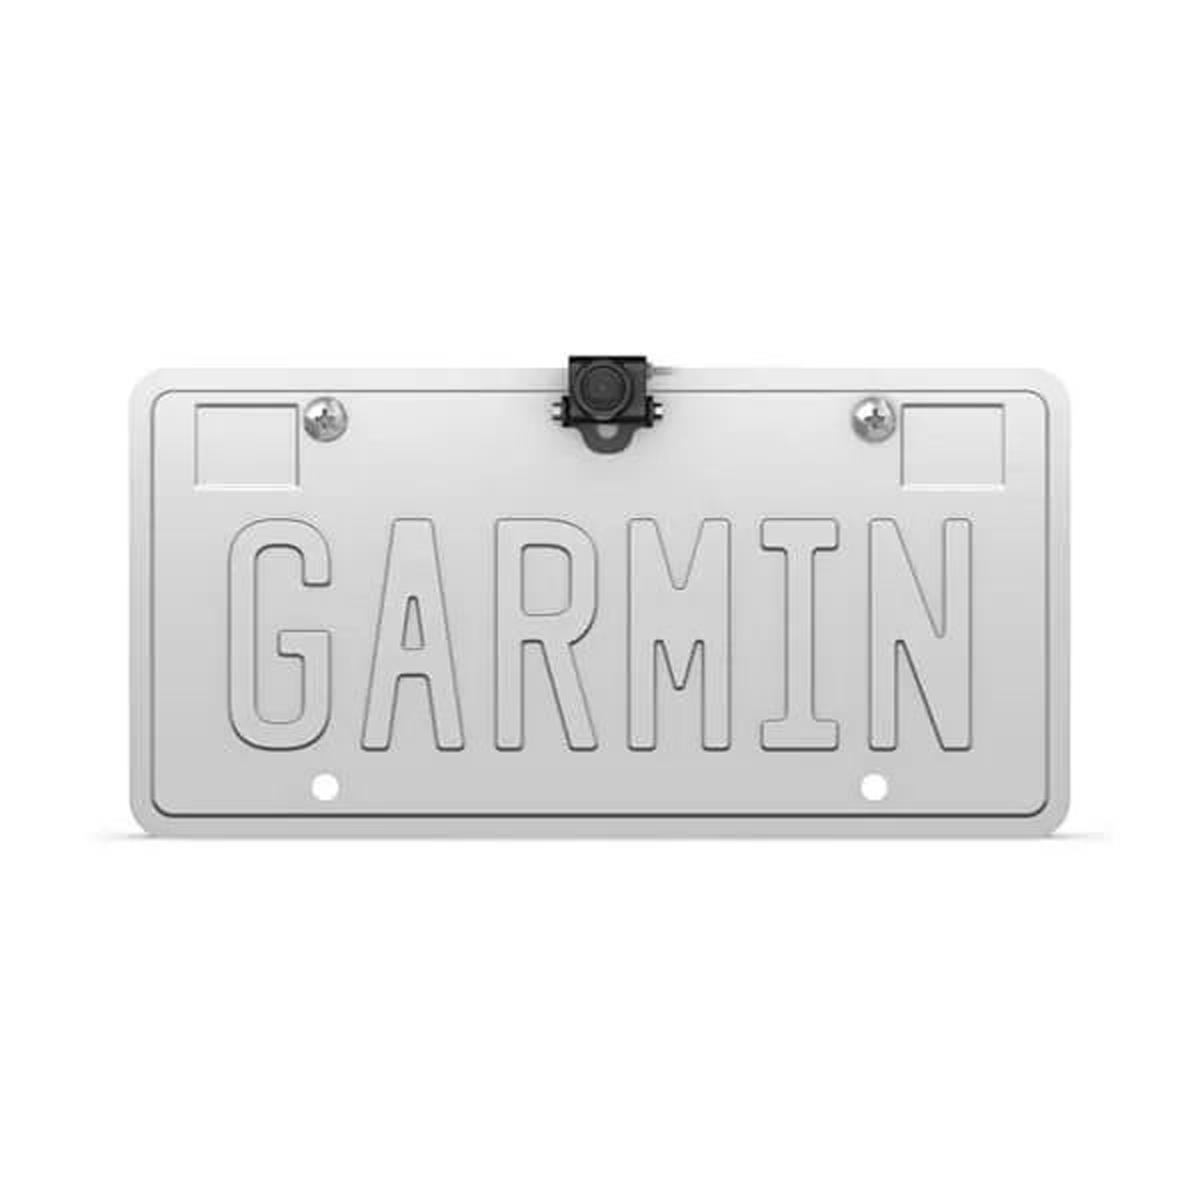 Image of Garmin BC 50 Wireless Backup Camera with License Plate Mount